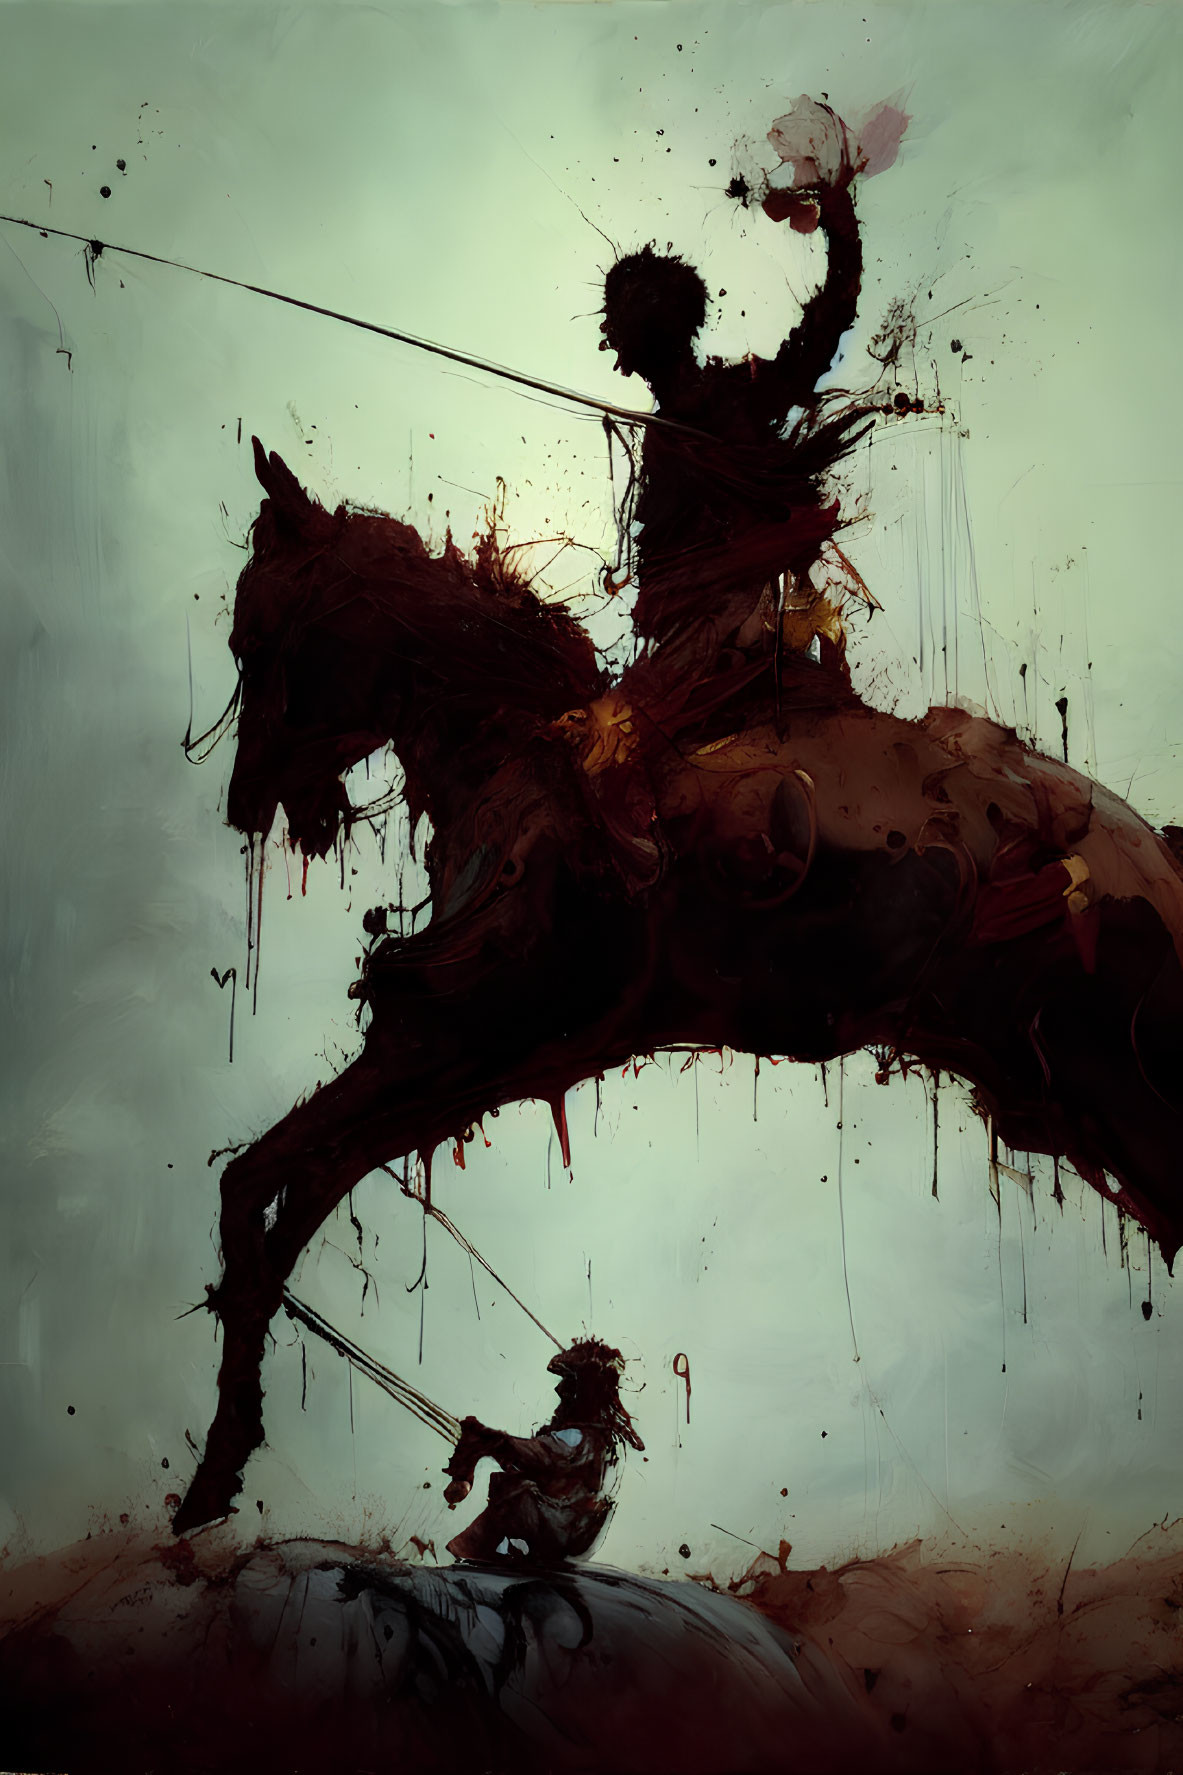 Shadowy equestrian figure in motion with dark, splattered hues